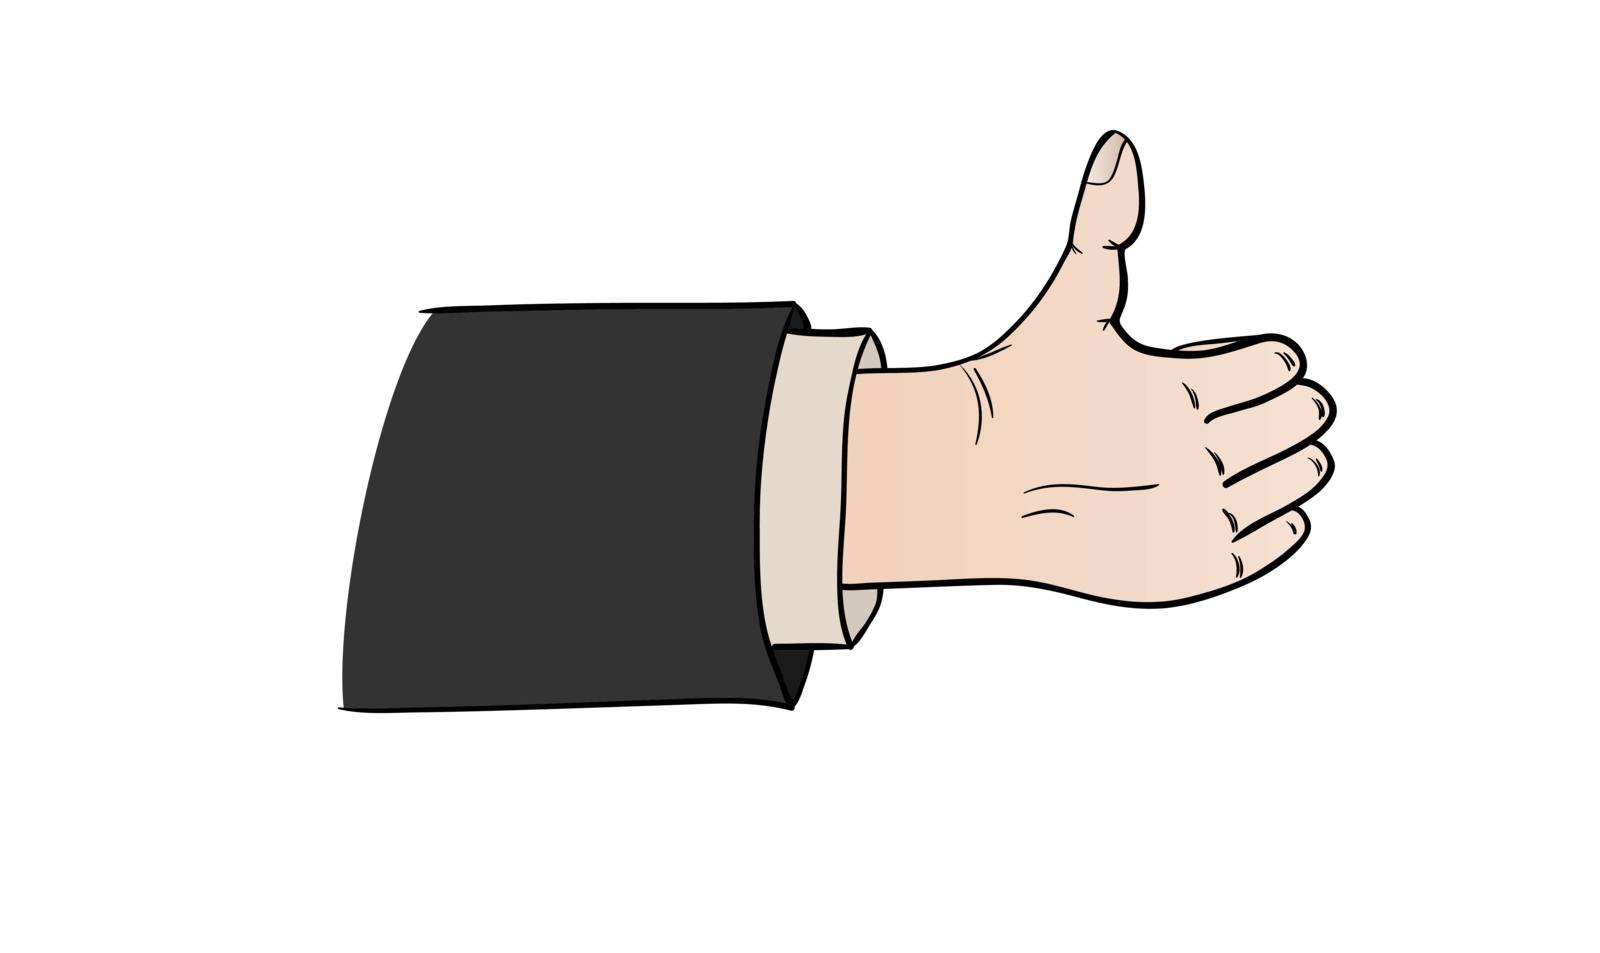 thumbs up in comic retro style, hand sign